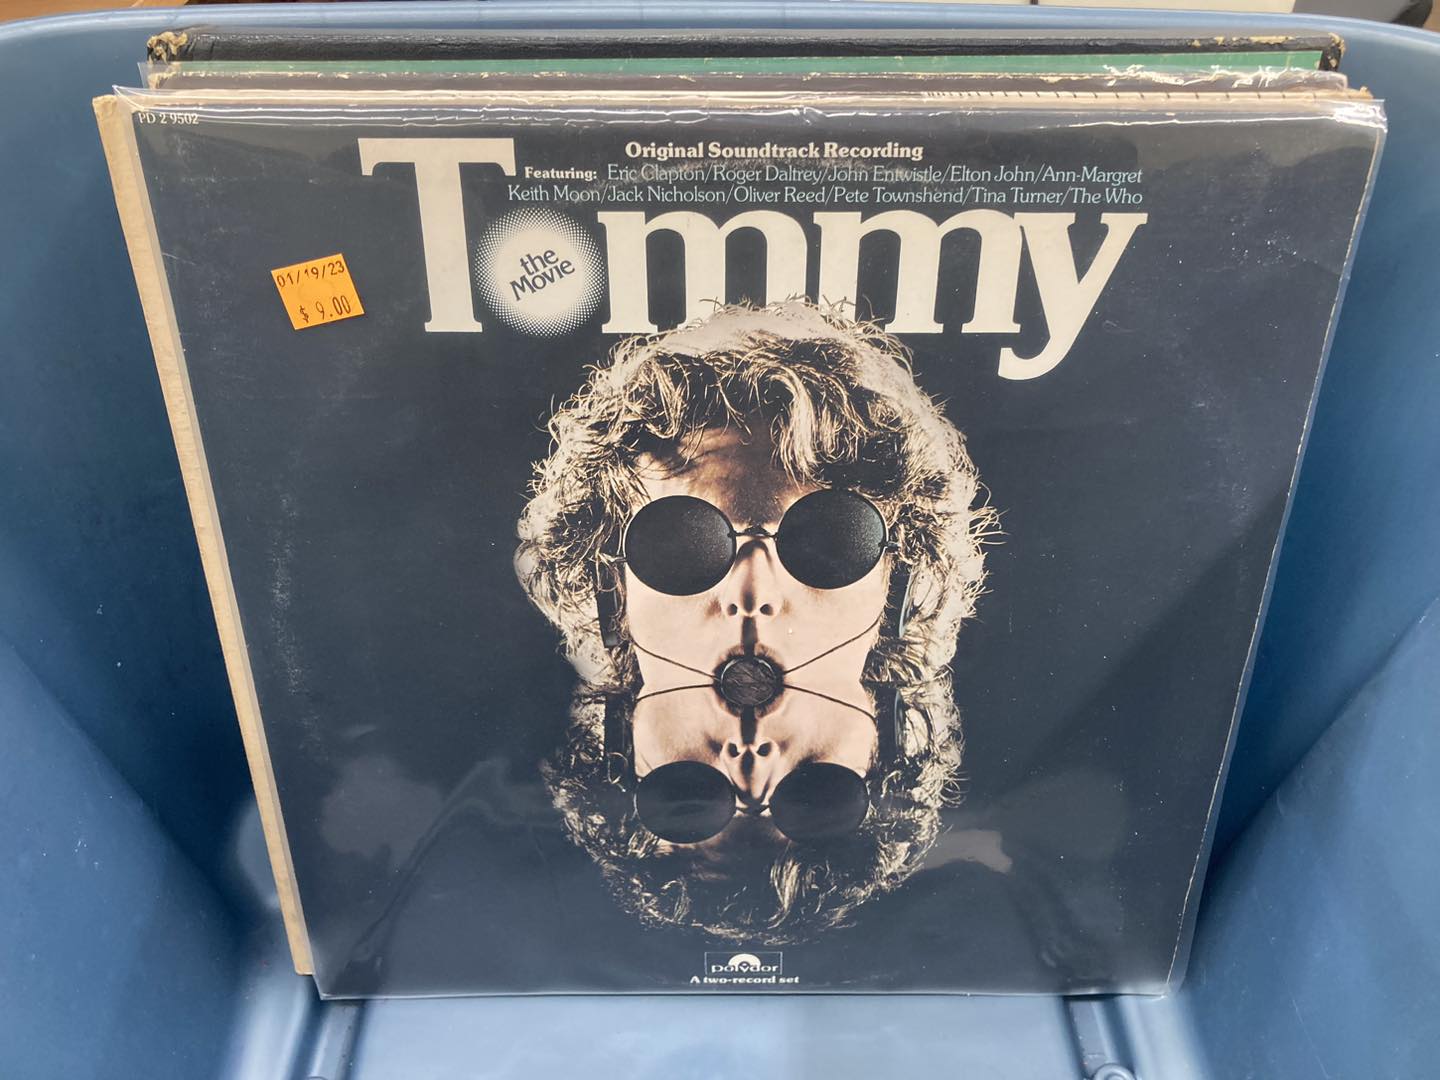 Album cover of Tommy original soundtrack recording. The word Tommy is in large white block letters at the top. There's a photo of a man with wavy hair and circular black sunglasses in the center of the album cover. 